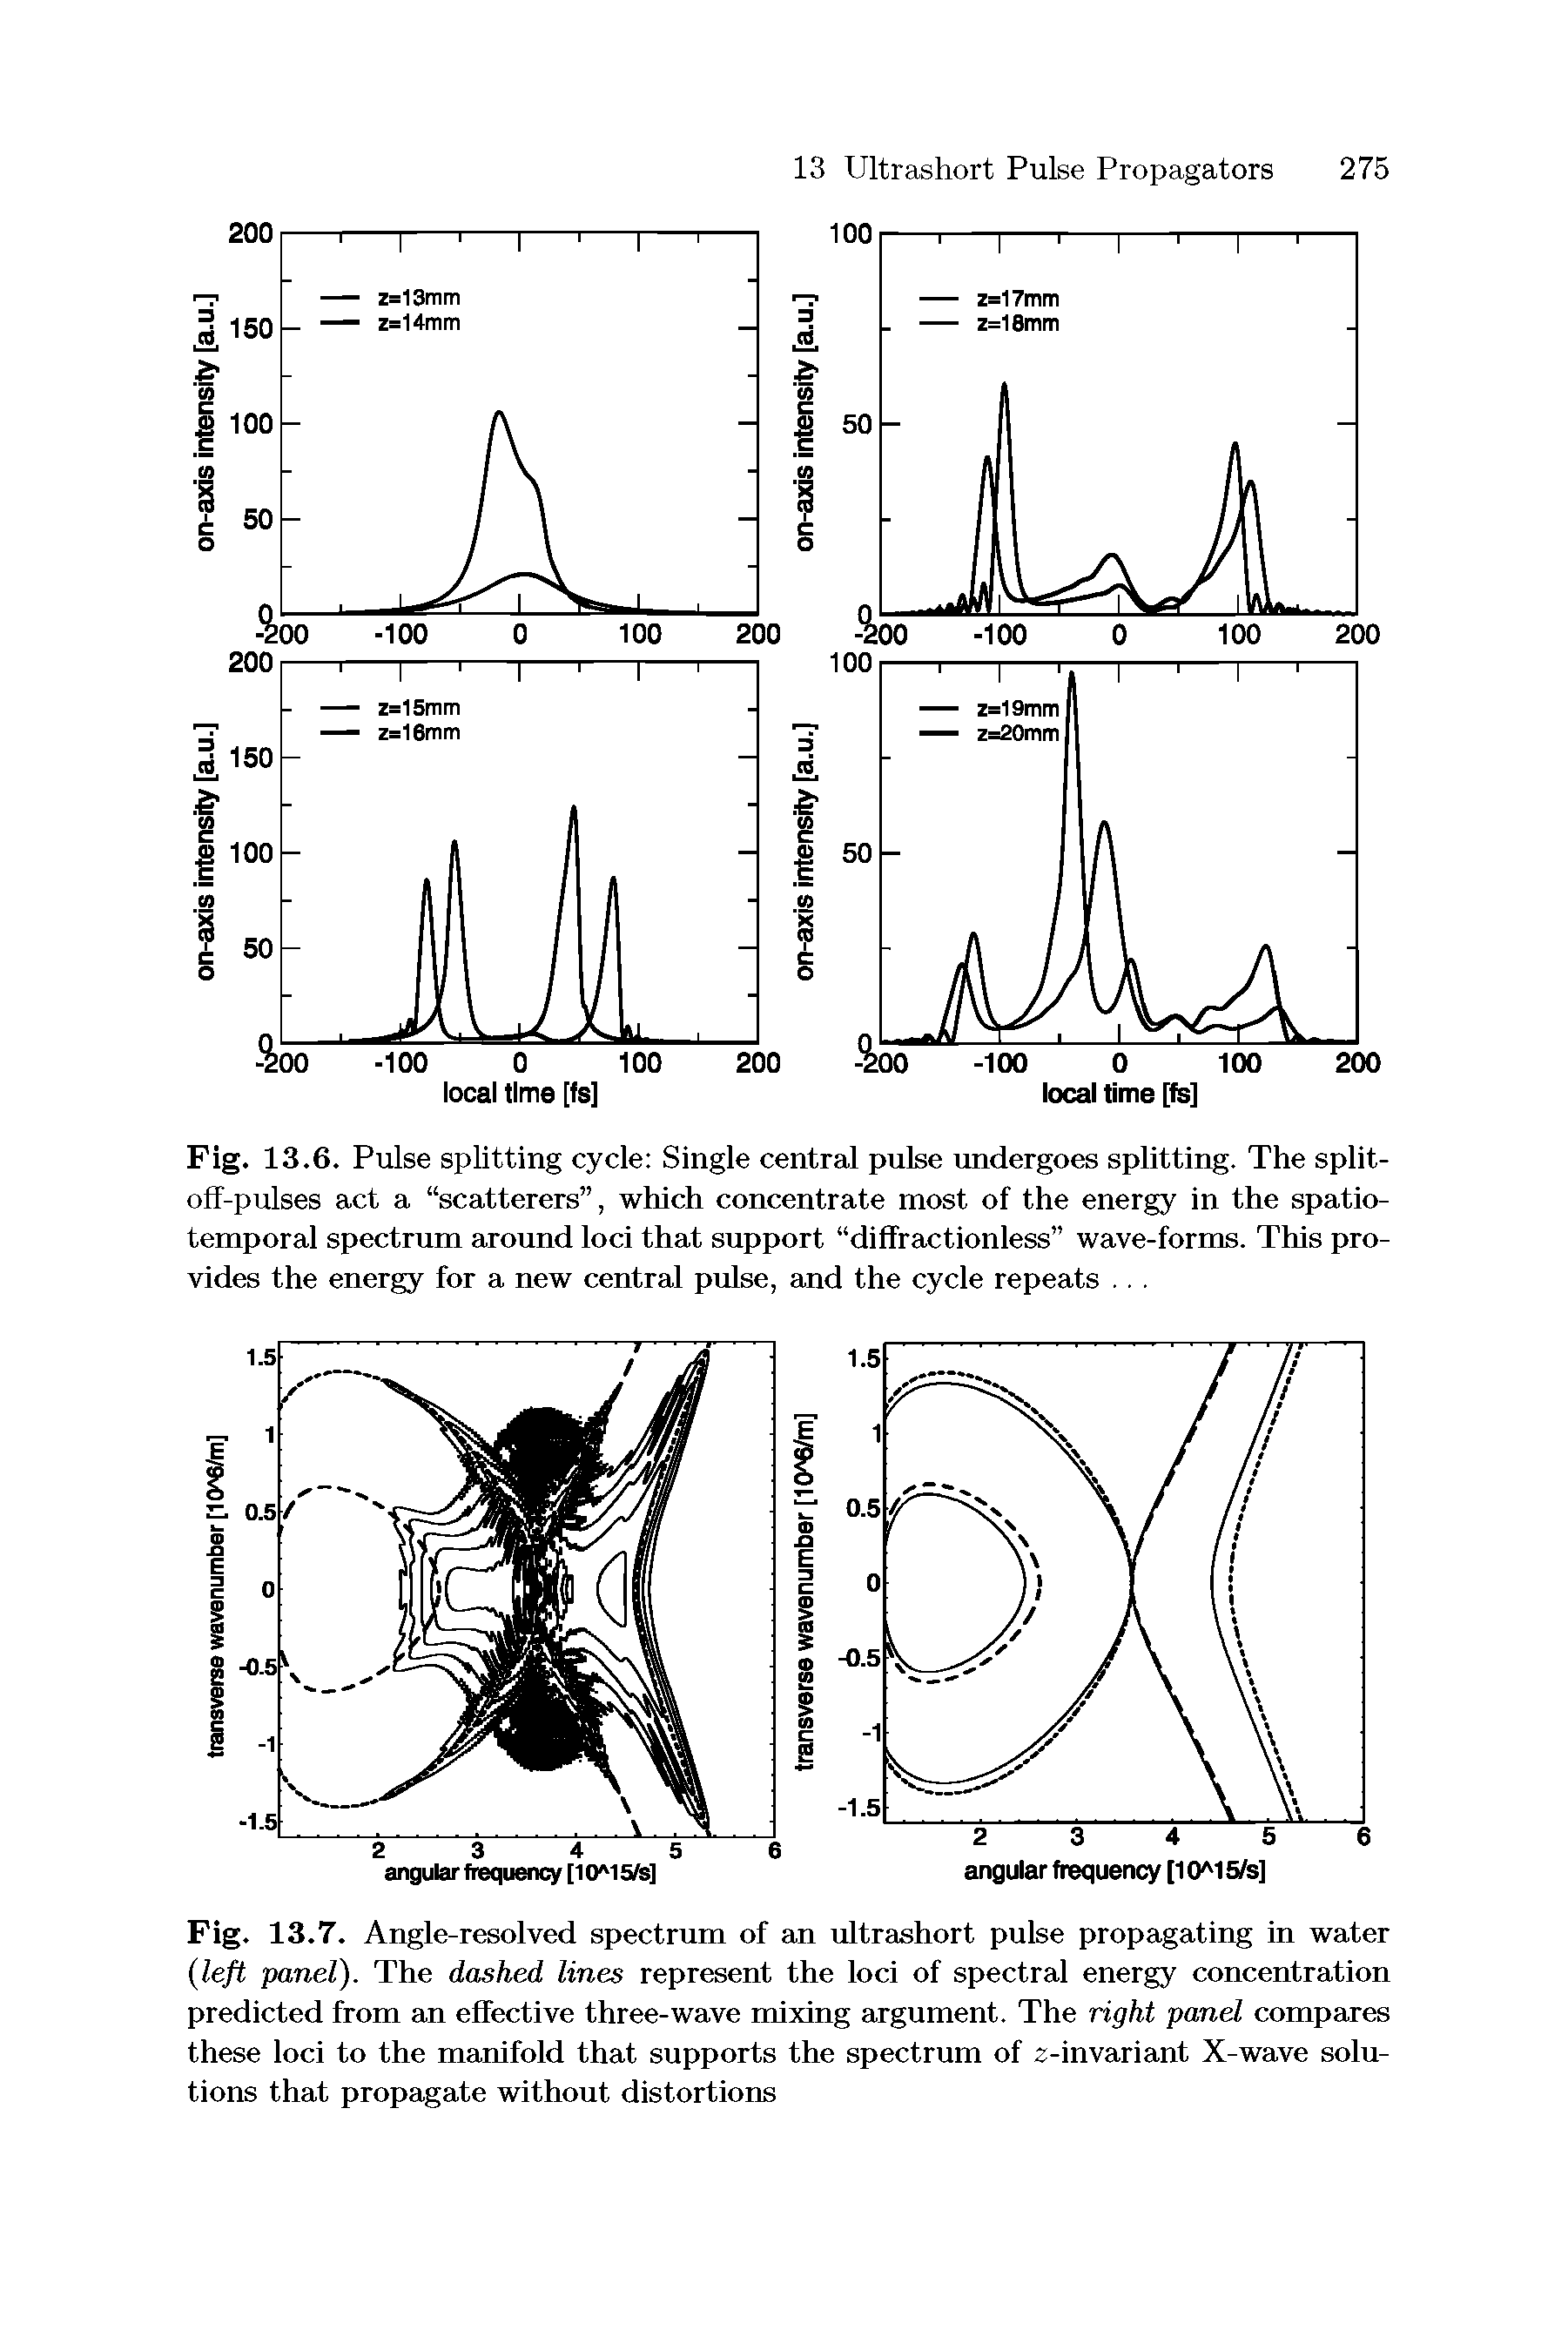 Fig. 13.7. Angle-resolved spectrum of an ultrashort pulse propagating in water (left panel). The dashed lines represent the loci of spectral energy concentration predicted from an effective three-wave mixing argument. The right panel compares these loci to the manifold that supports the spectrum of 2-invariant X-wave solutions that propagate without distortions...